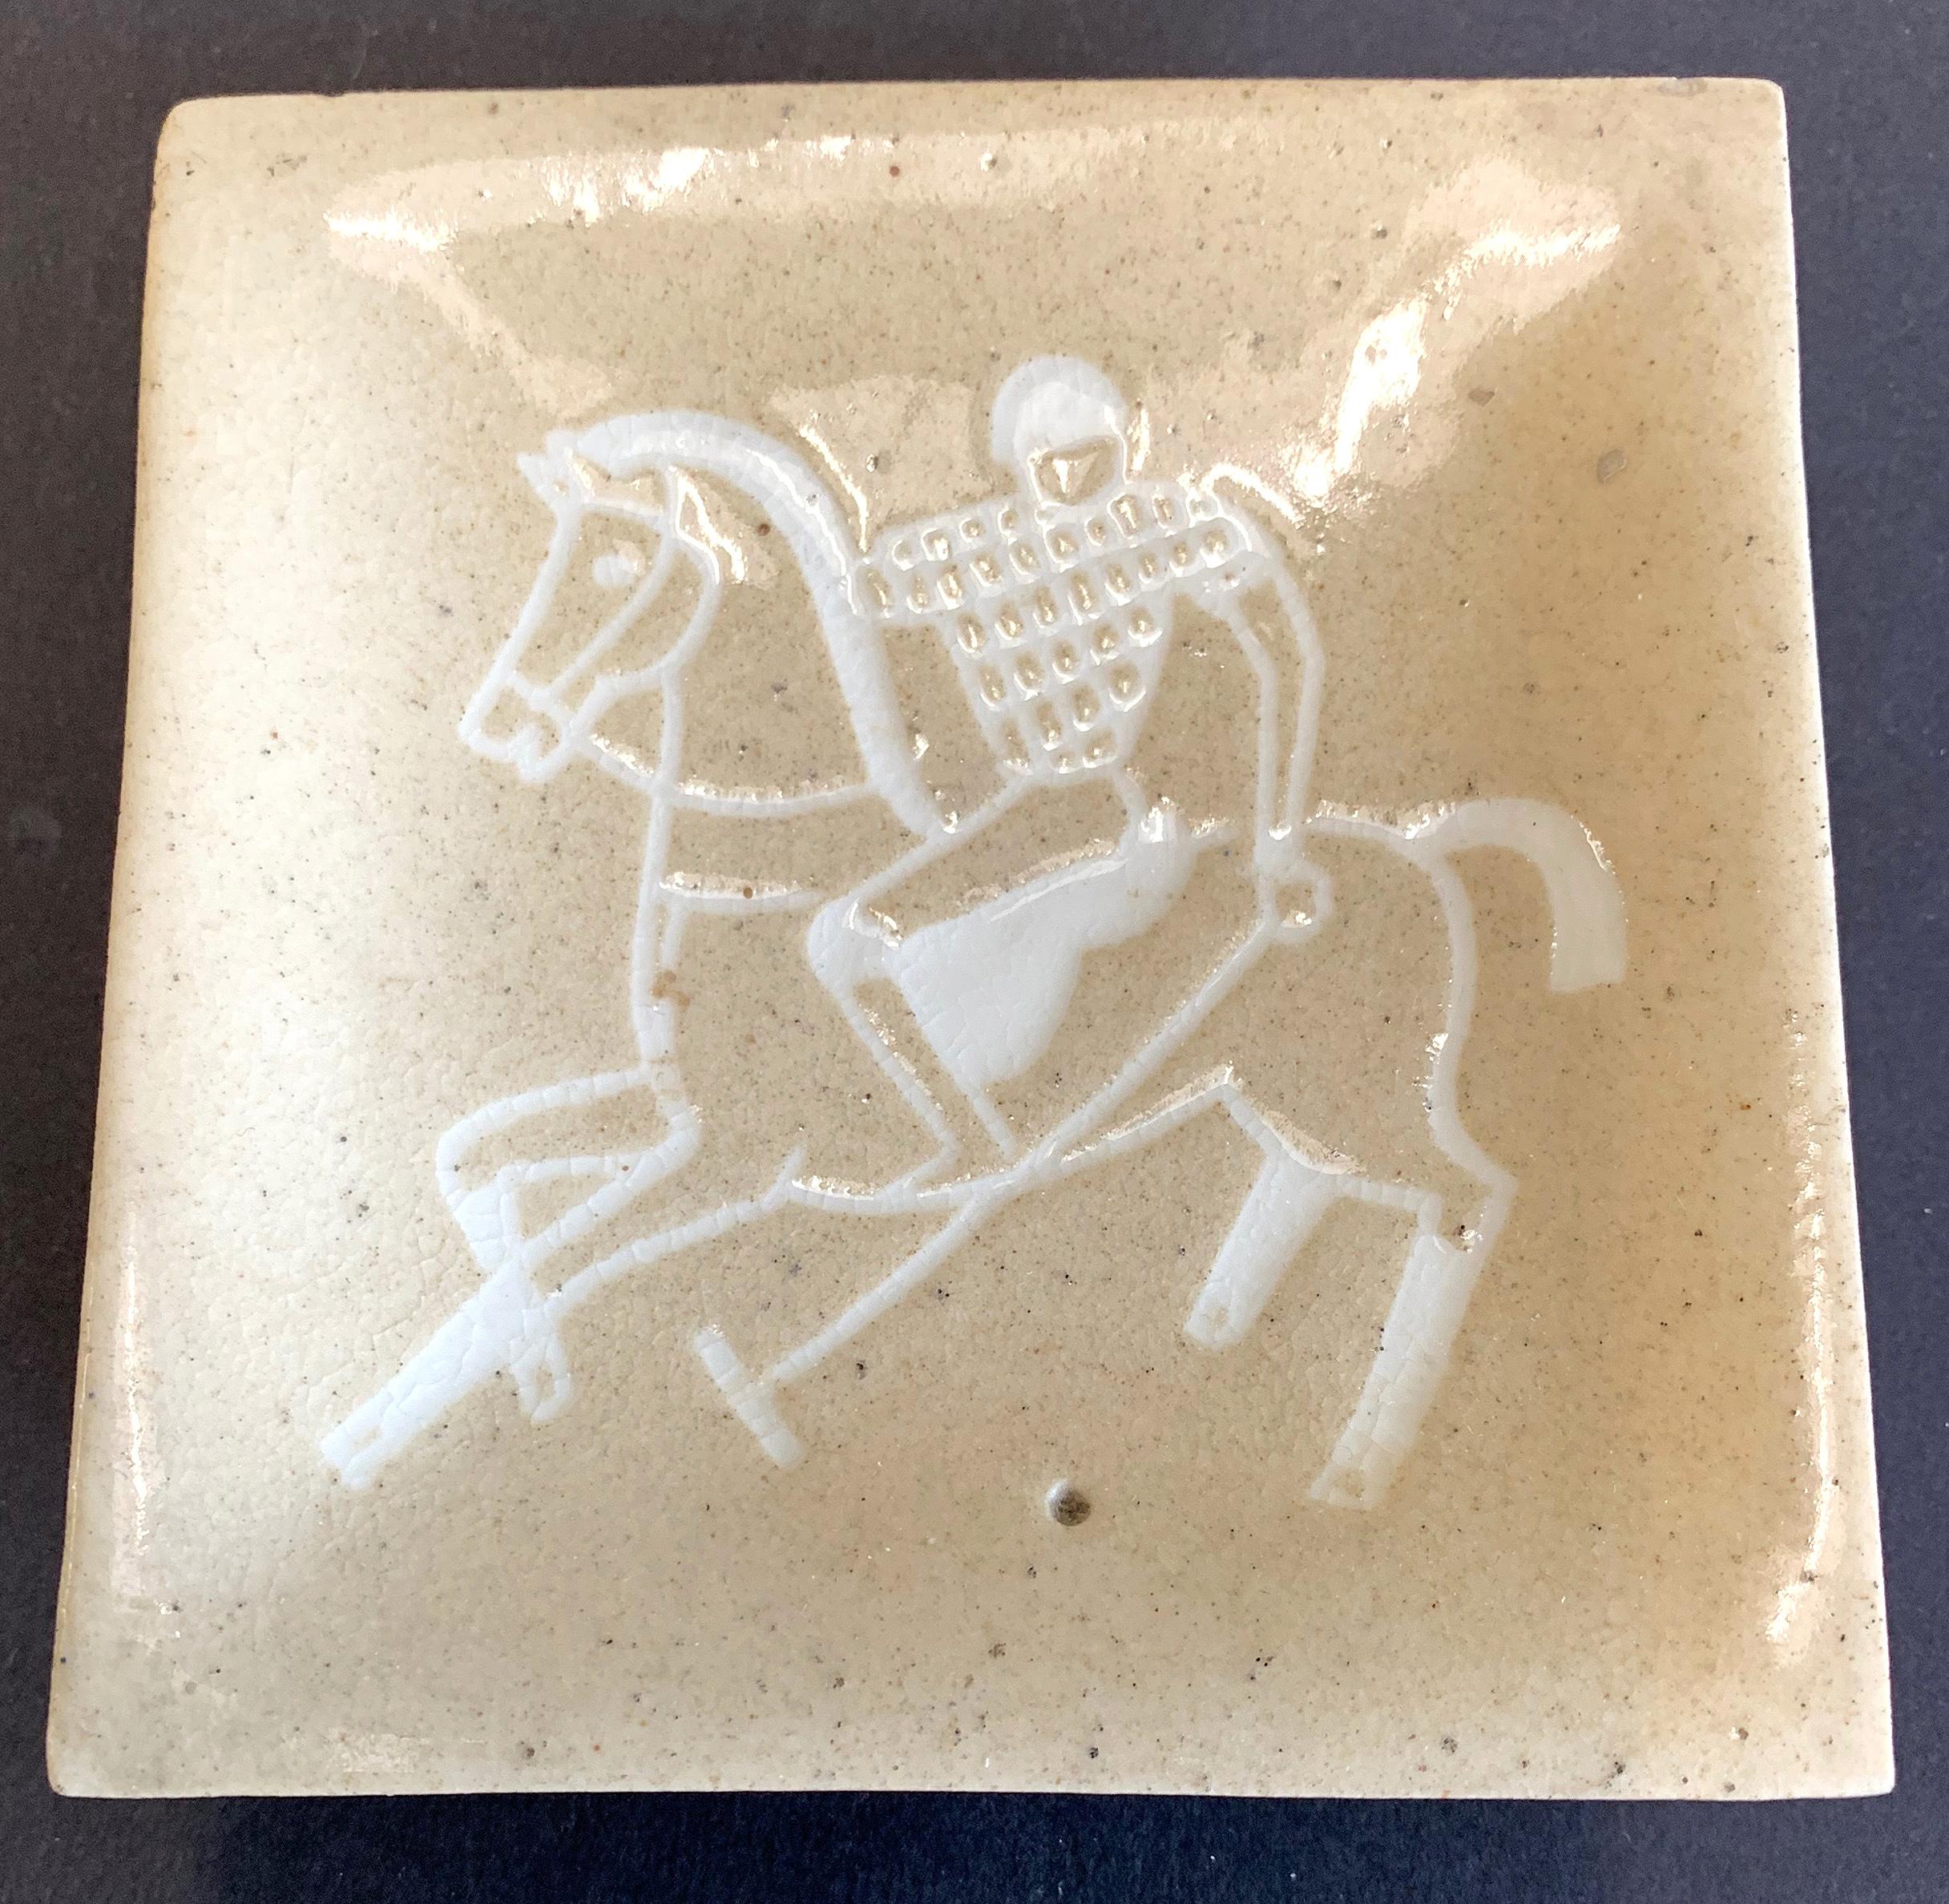 Beautifully glazed in shades of white and sand, this rare footed dish depicts a polo player reaching out to strike the ball. The primary glaze has a beautiful mottled appearance, and the artist -- Waylande Gregory -- very cleverly represented the